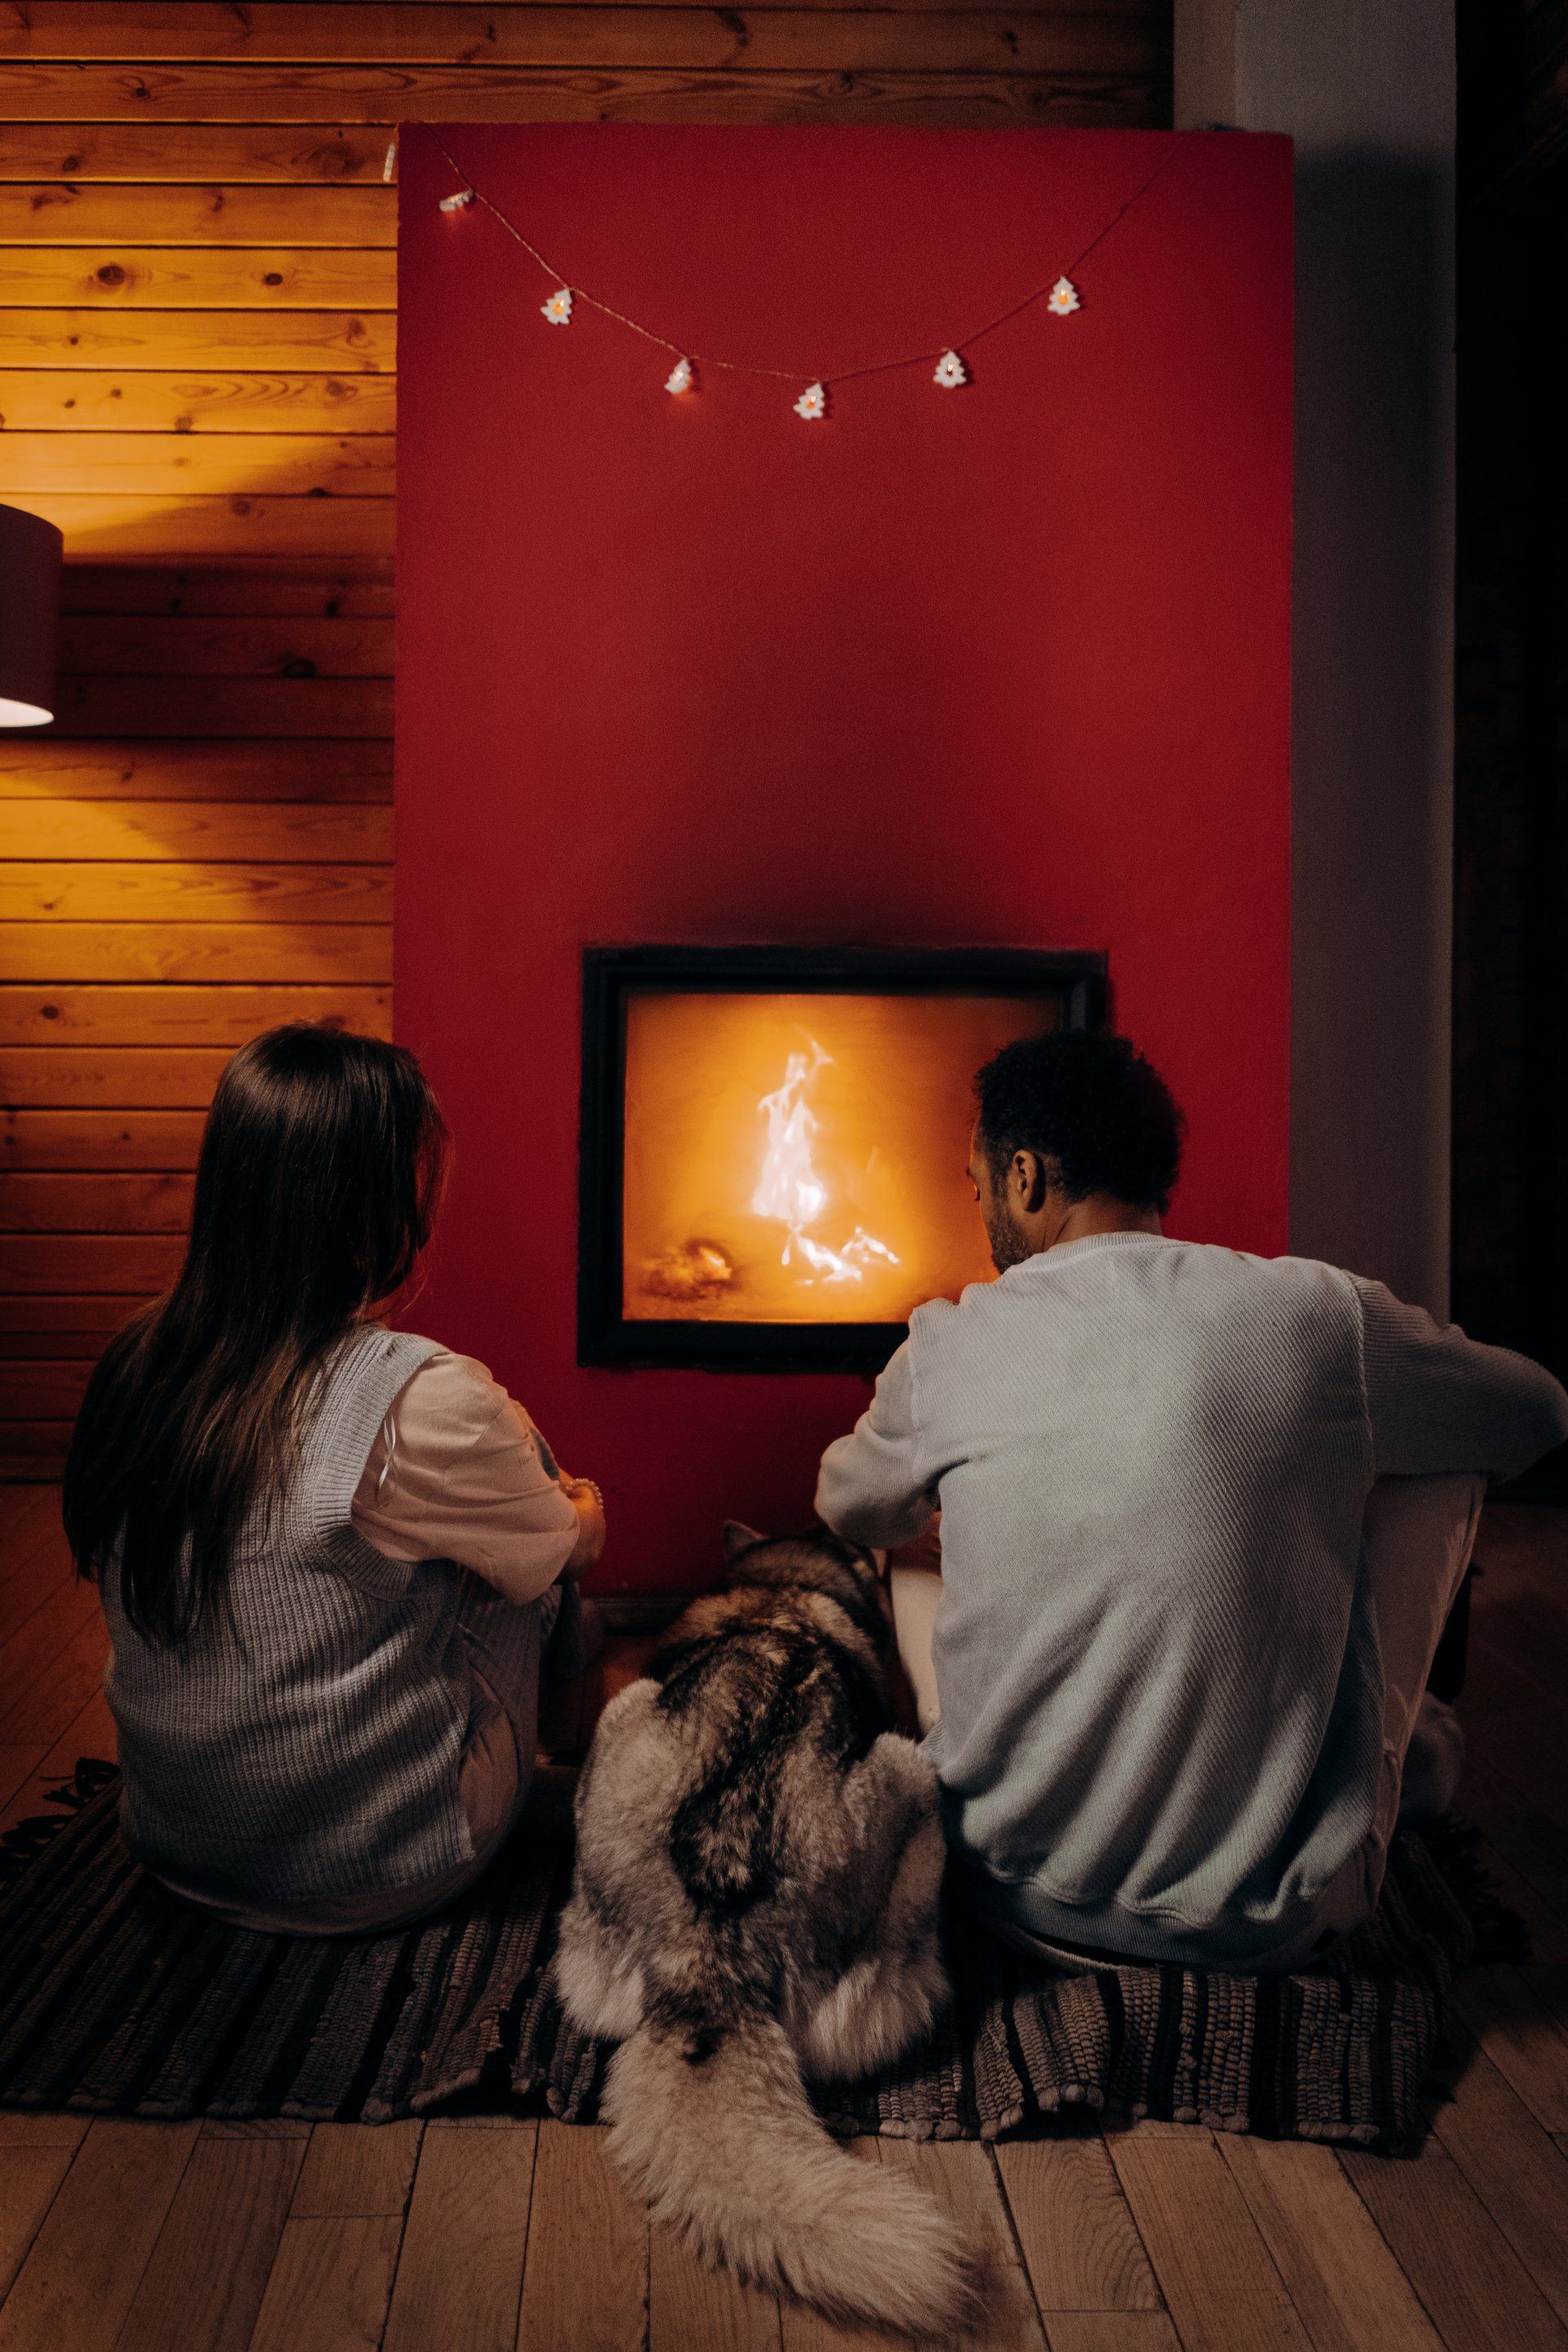 couple in front of fireplace